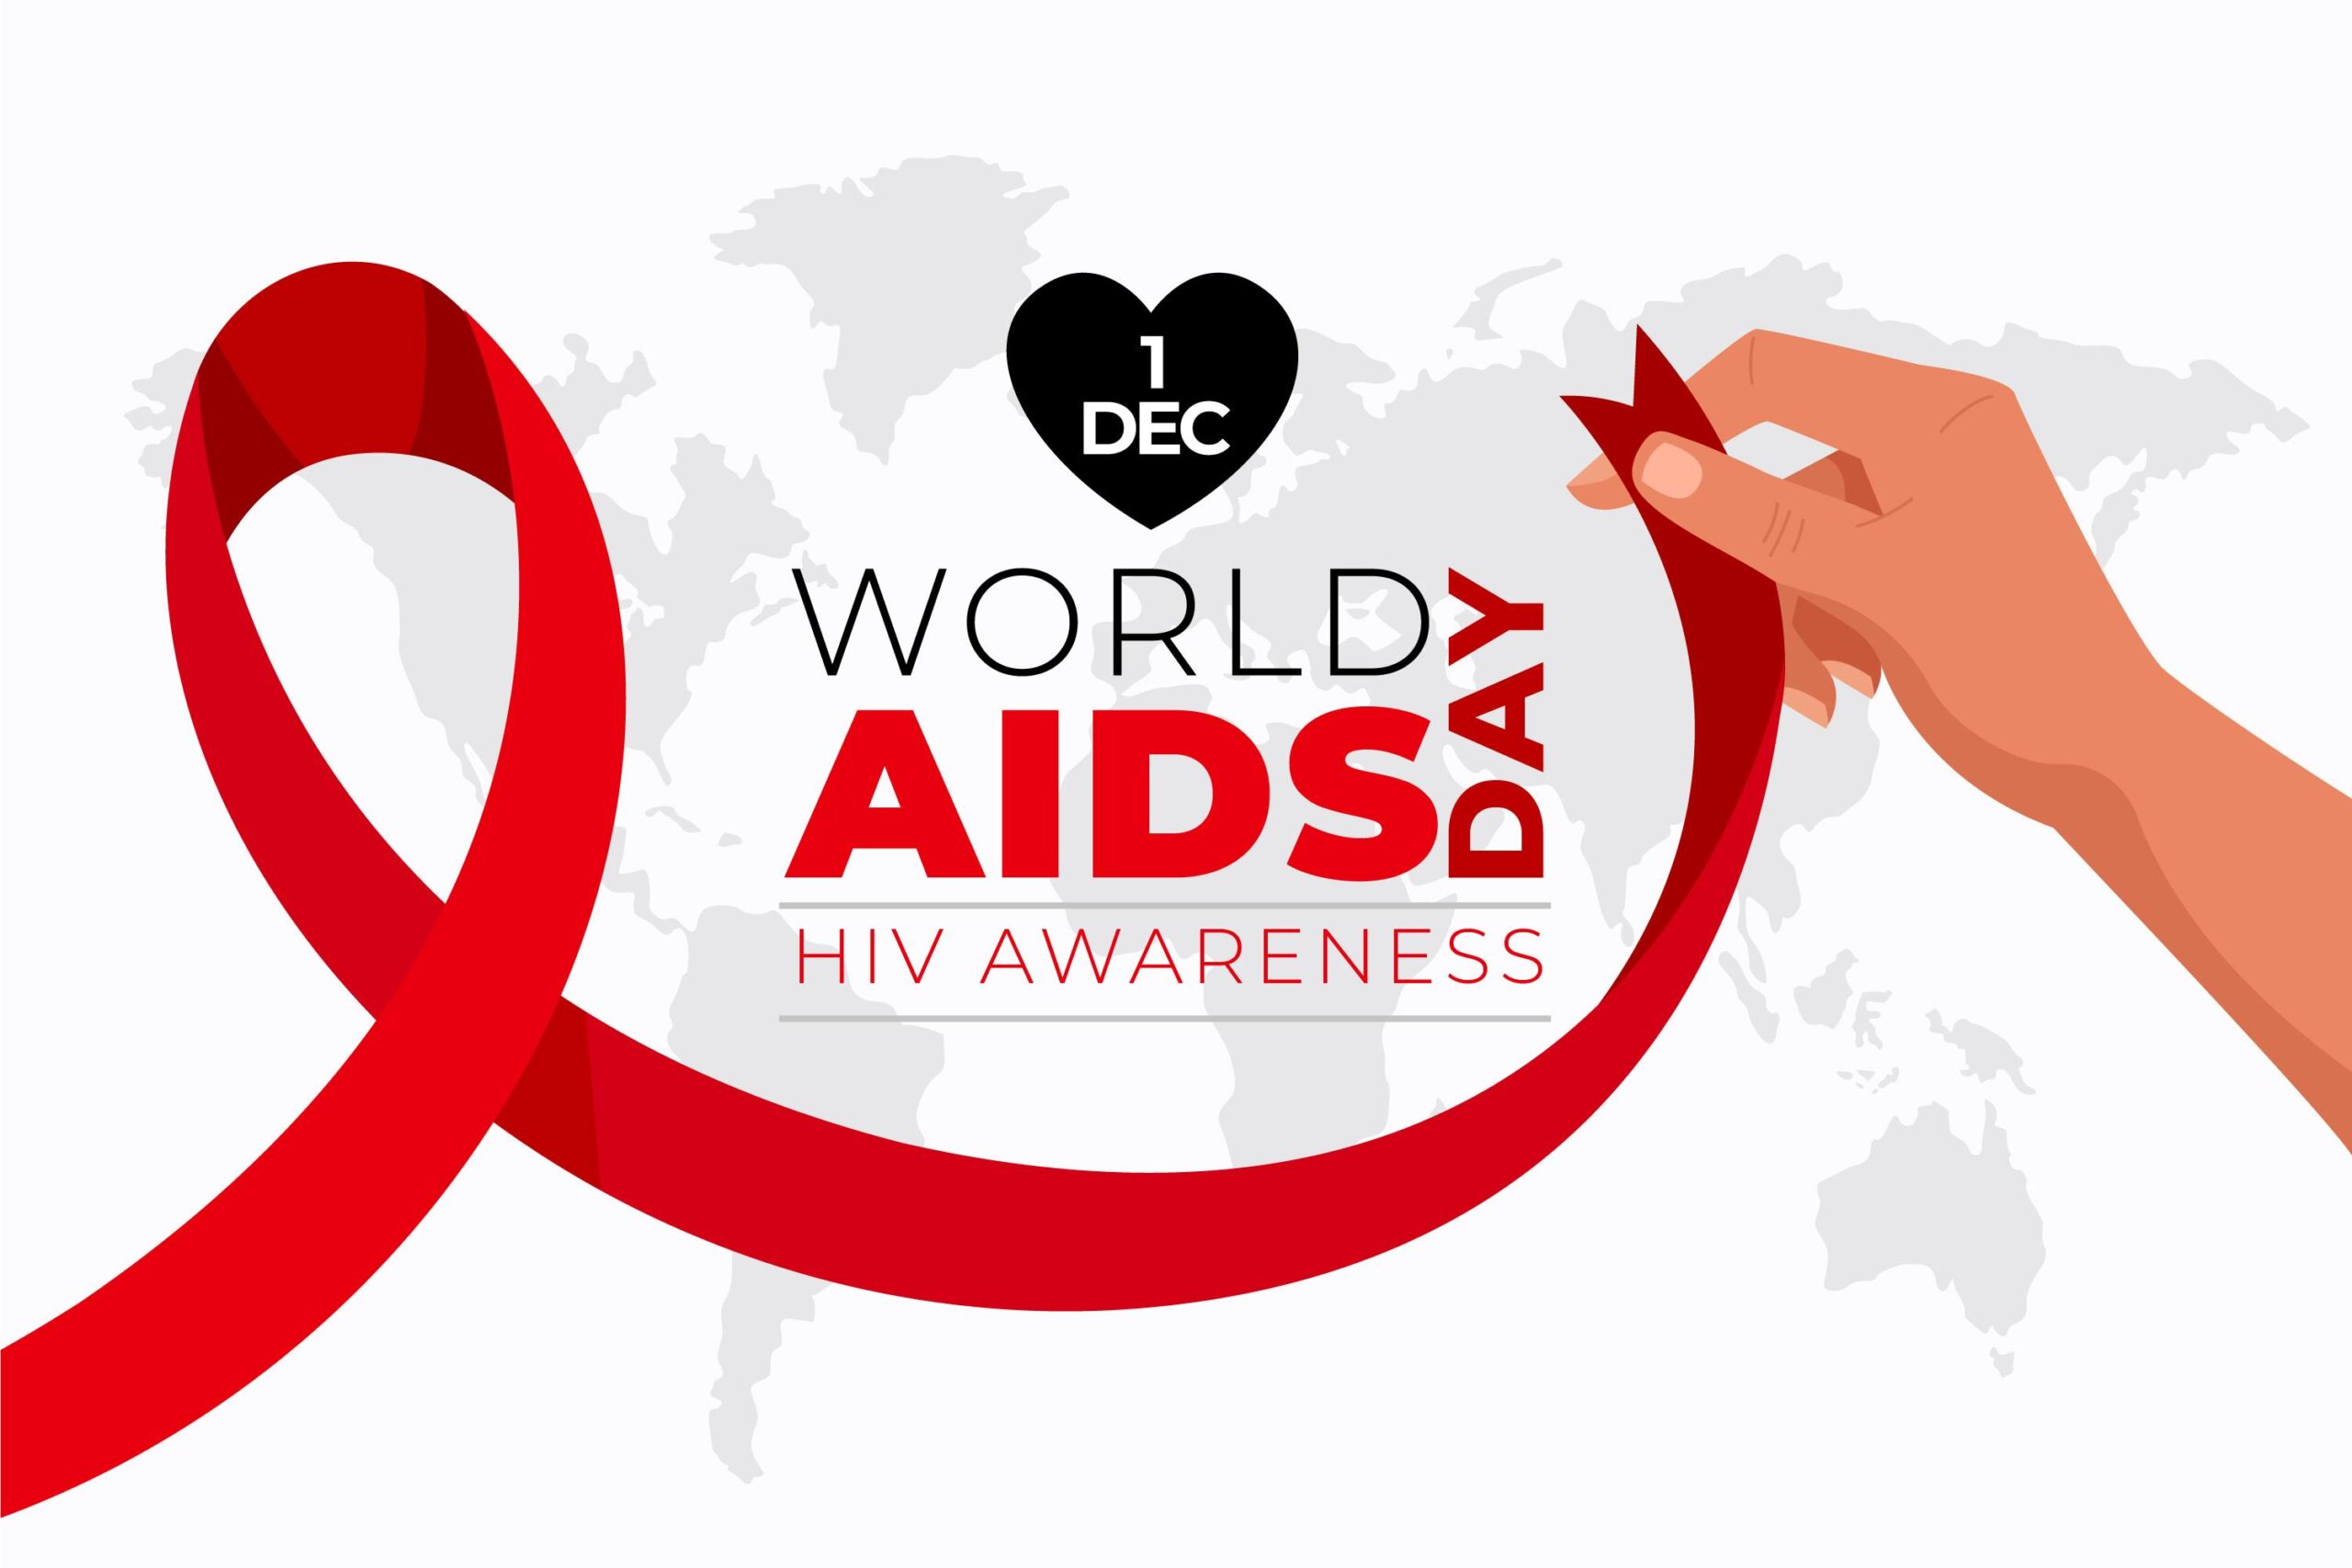 Let us talk openly about AIDS